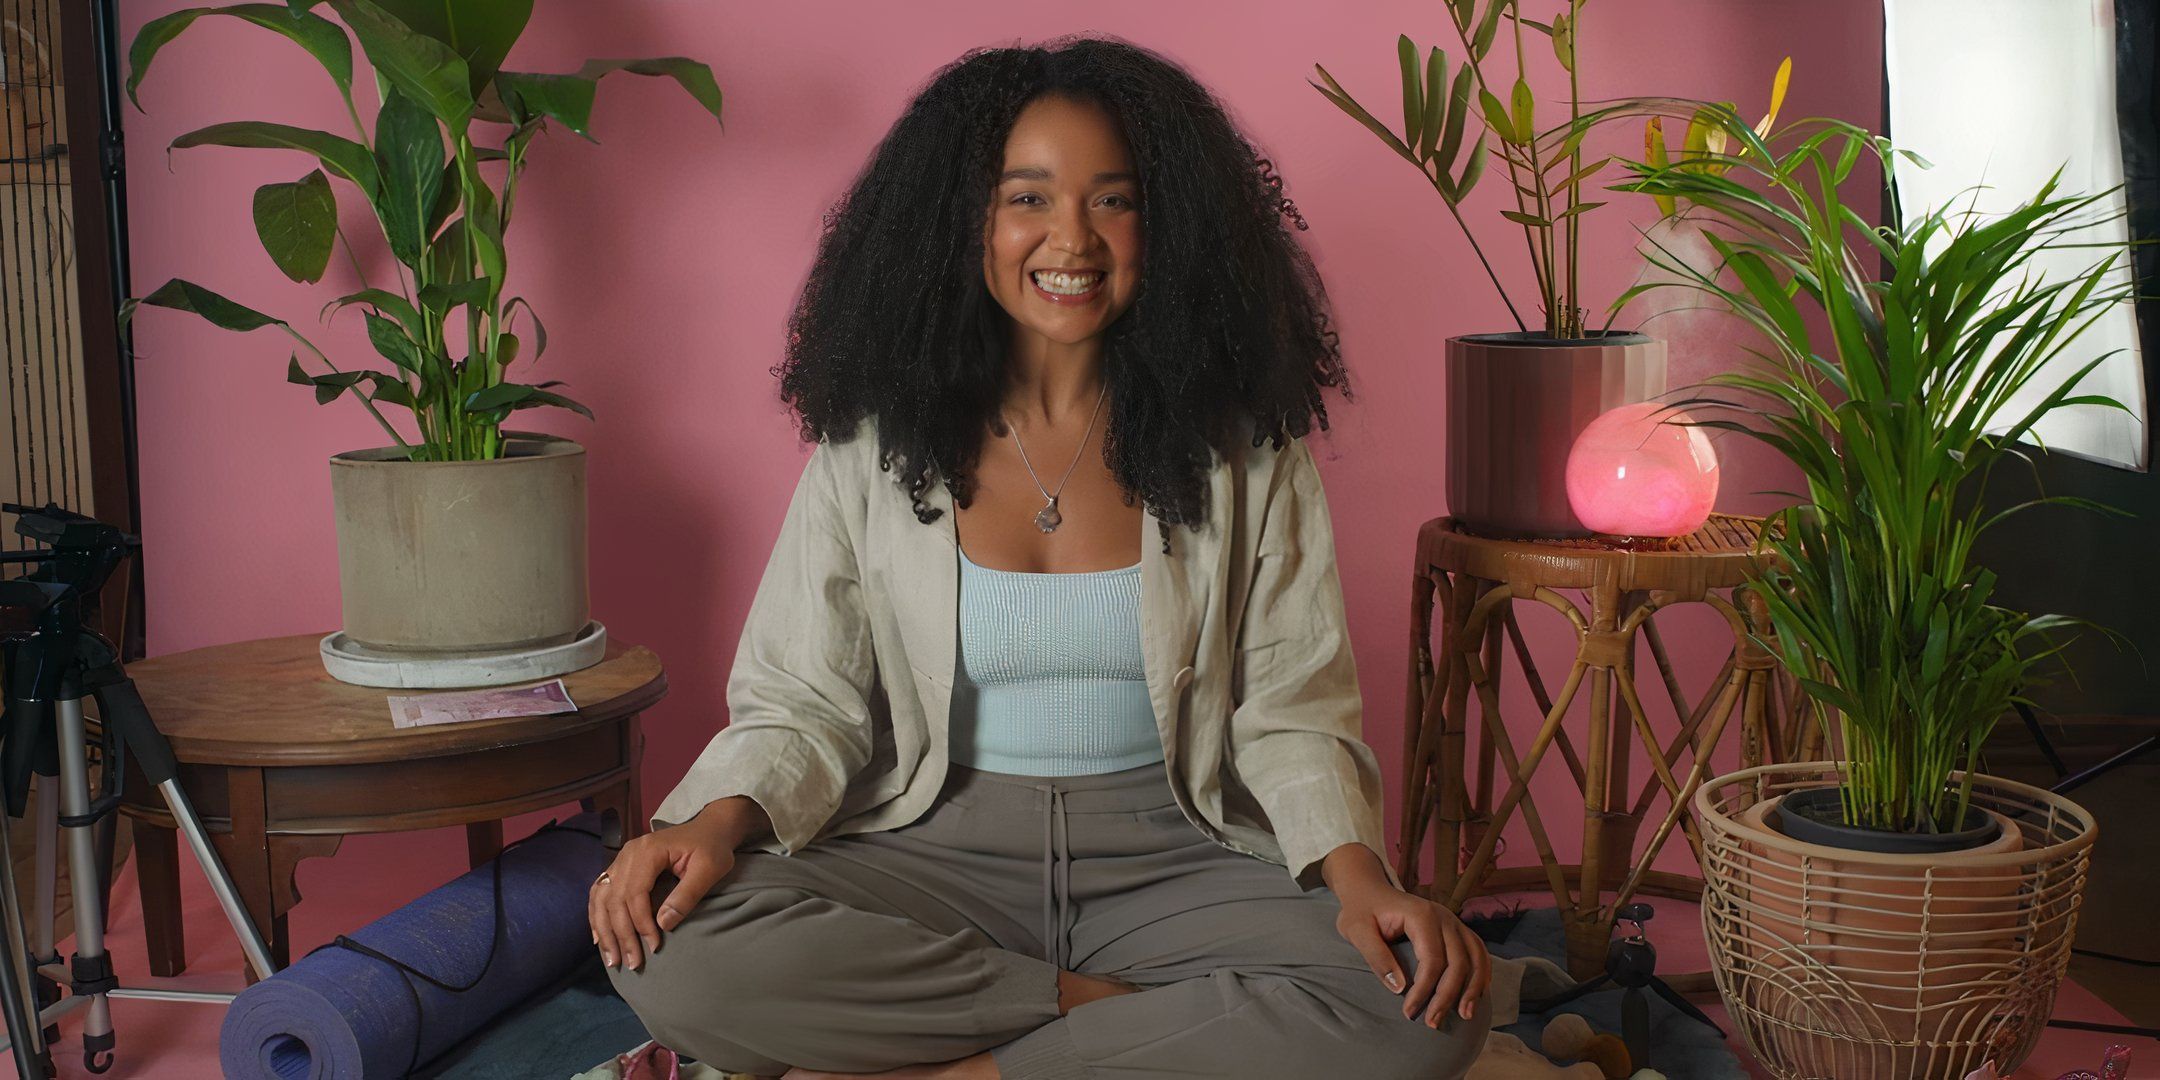 Aisha Dee as Cecilia in front of pink influencer backdrop in Sissy.